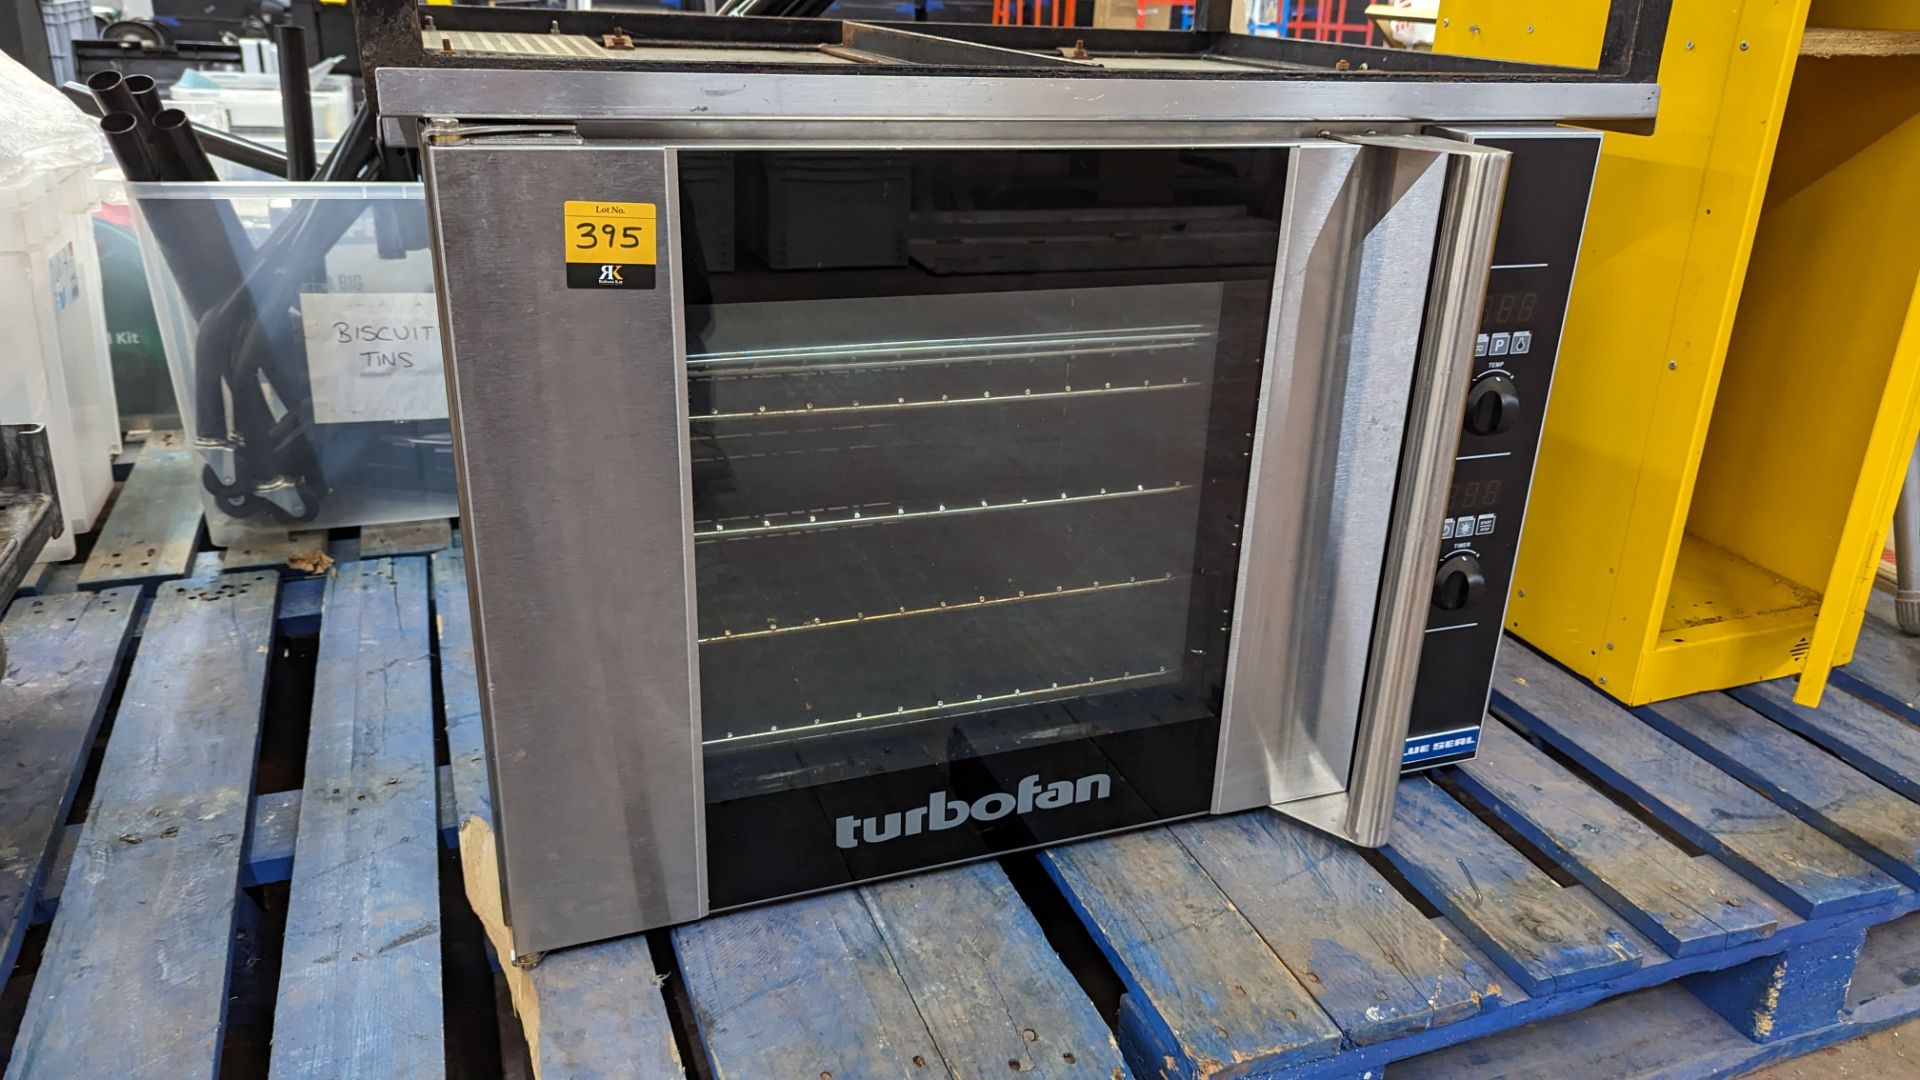 Blue Seal Turbofan convection oven model E31D4. Capacity for up to 4 full-size (1/1GN) Gastronorm p - Image 9 of 9